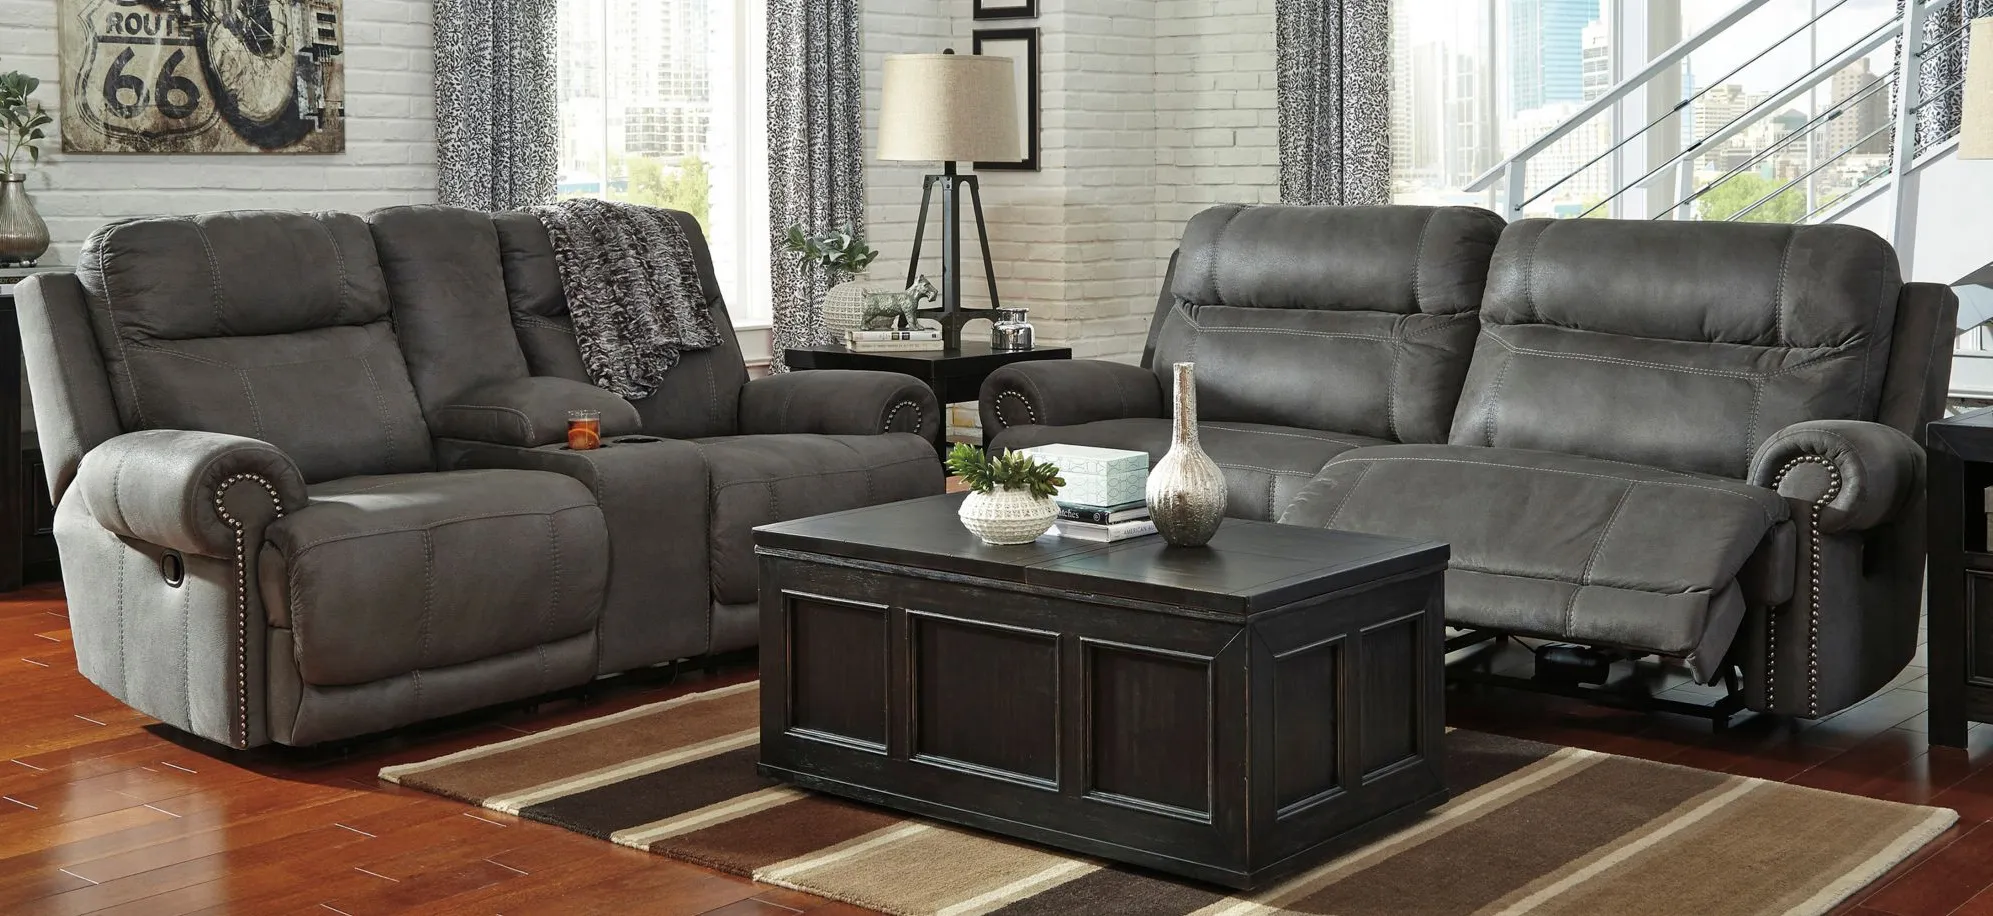 Romilly 2-pc.. Reclining Sofa and Loveseat Set in Gray by Ashley Furniture